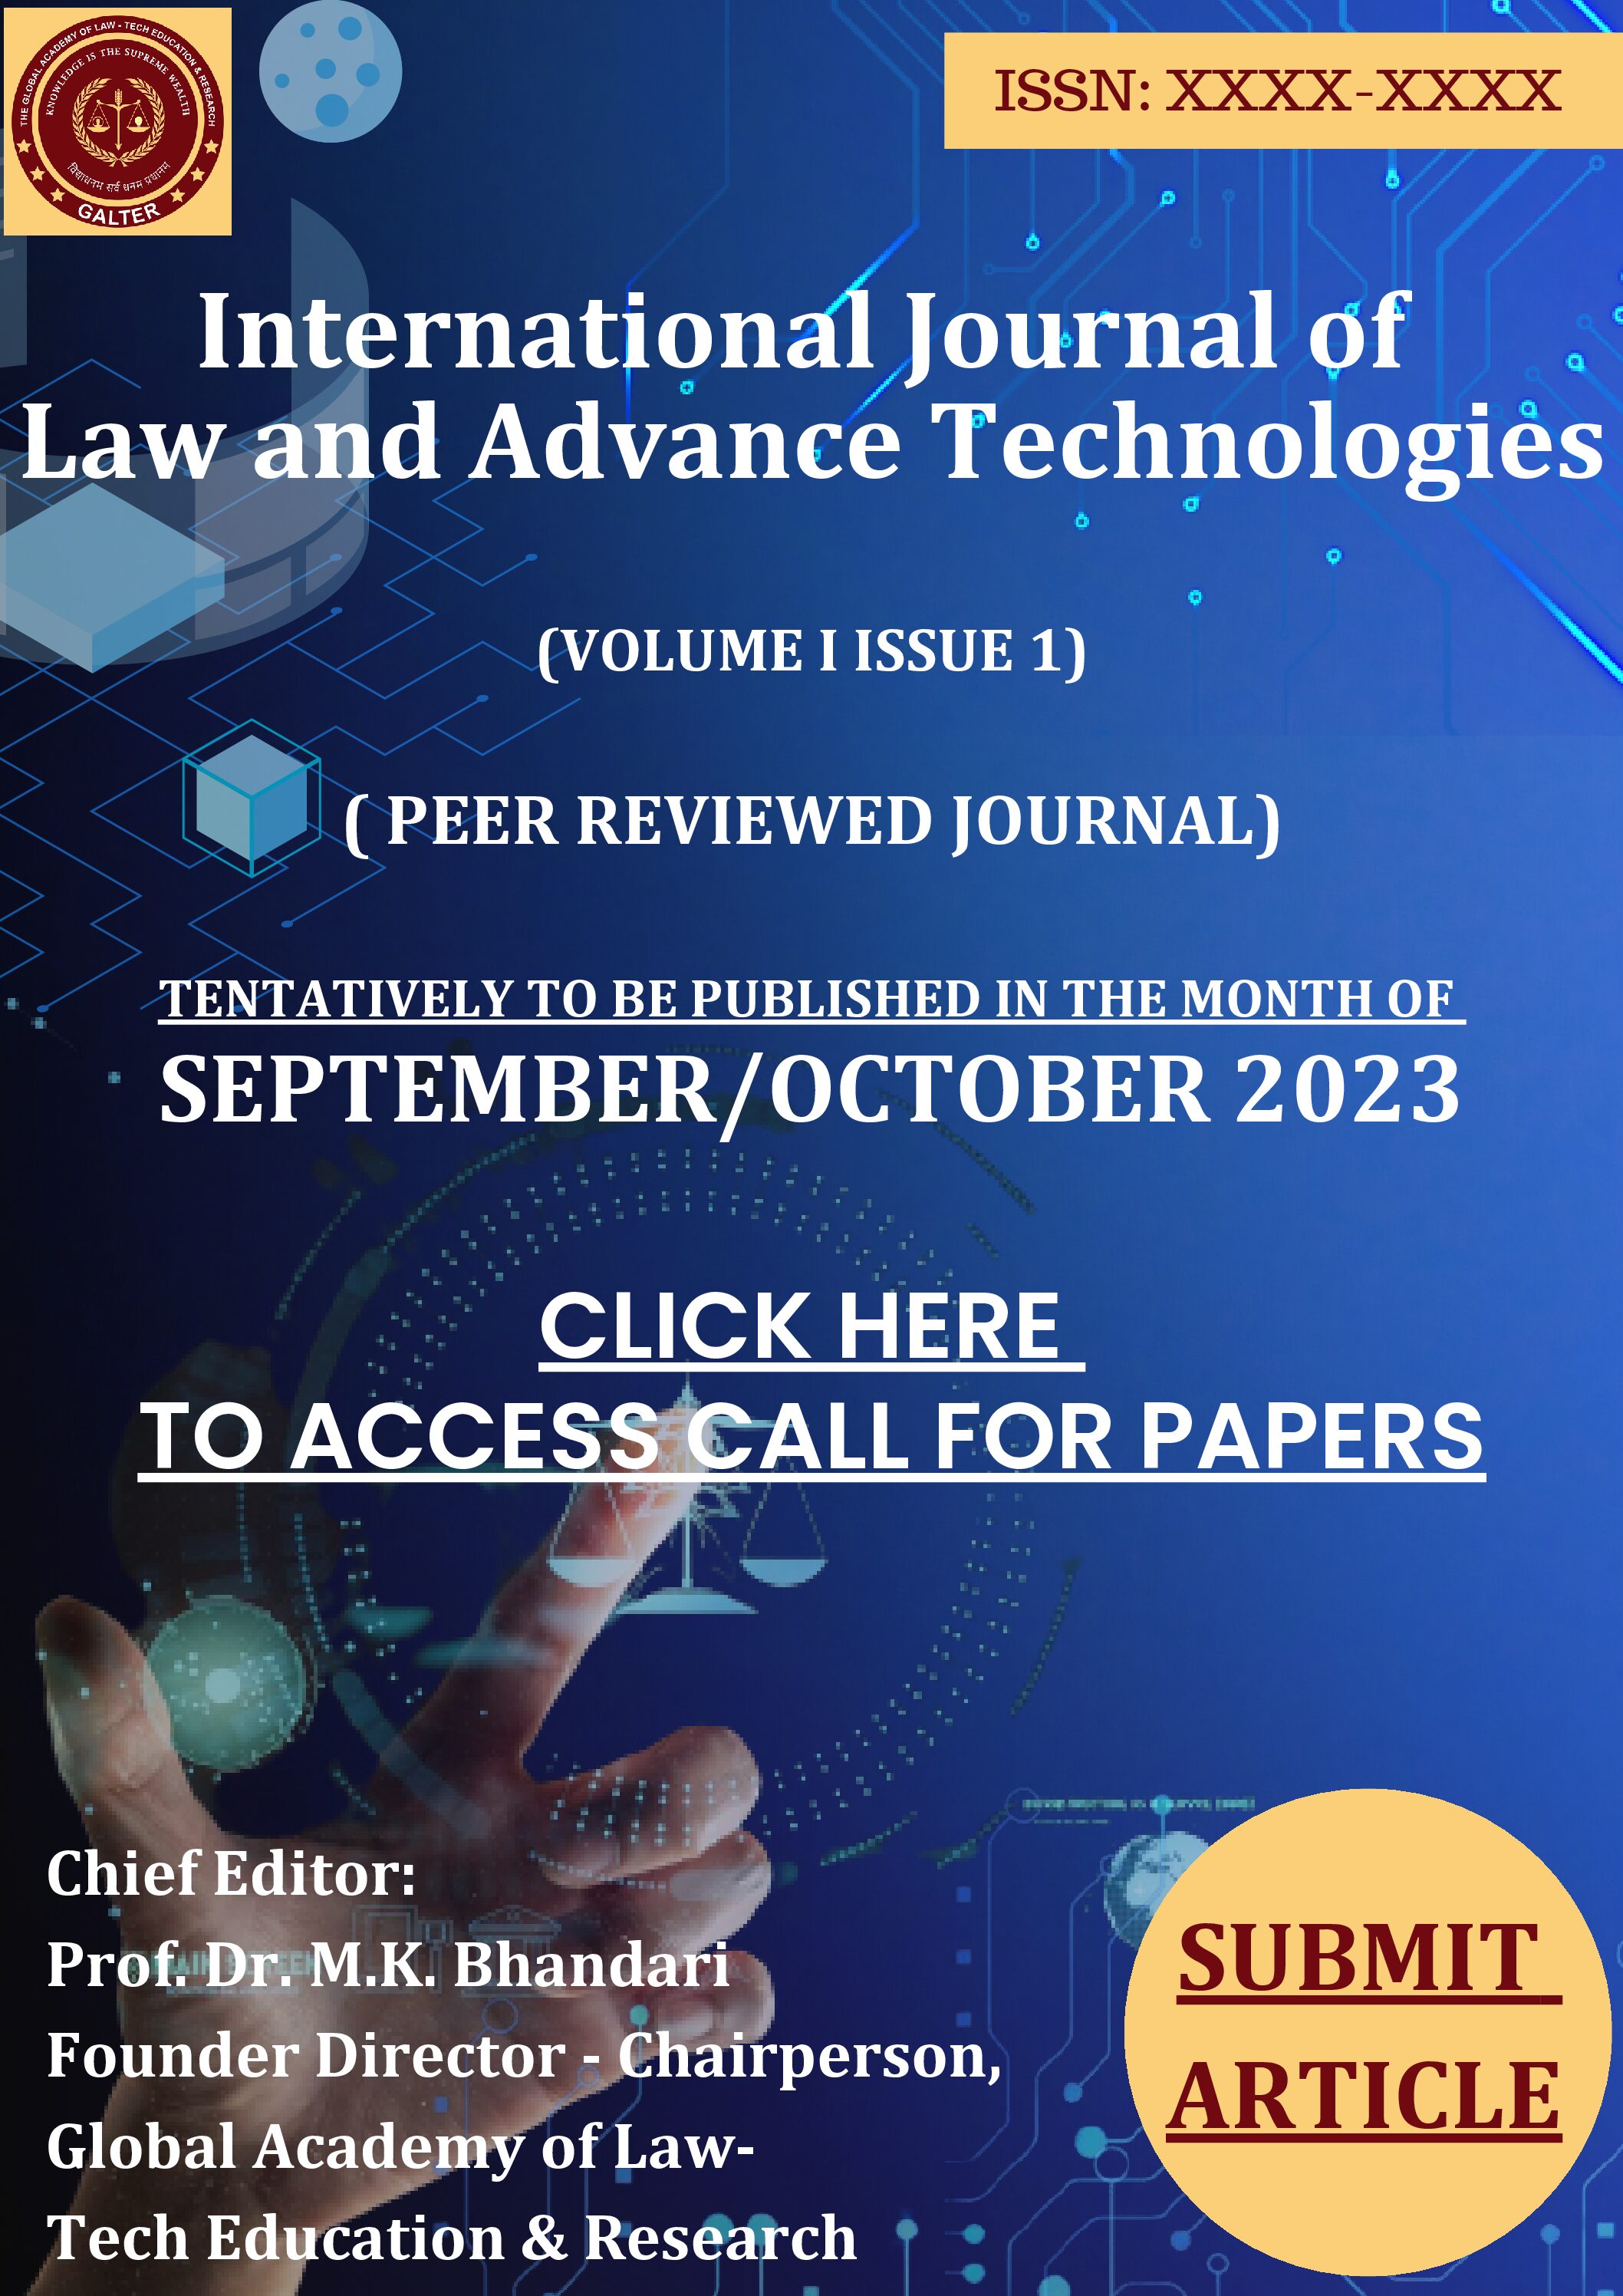 International Journal of law and Advanced Technologies (ULAT)(Double Blind Peer Reviewed)CALL FOR PAPERS